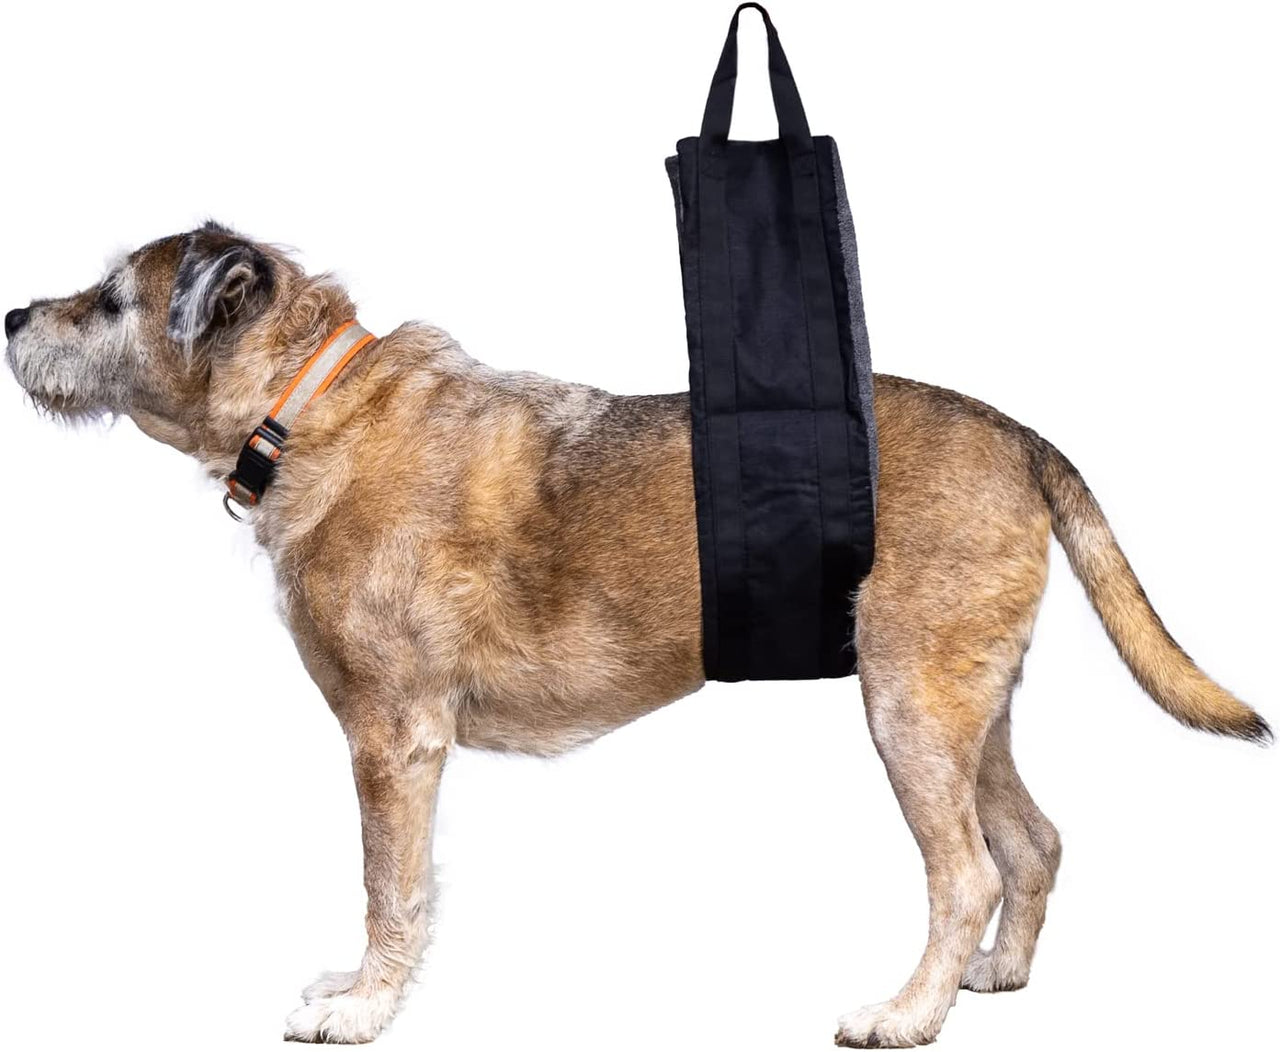 DesertUSA 30-120 lb Portable Large Dog Sling for Back Leg Support Helps Elderly Dogs with Reduced Mobility, Dog Lift Harness, Dog Lifter for Arthritis ACL Cruciate Ligament Rehabilitation, Size 6"x40"